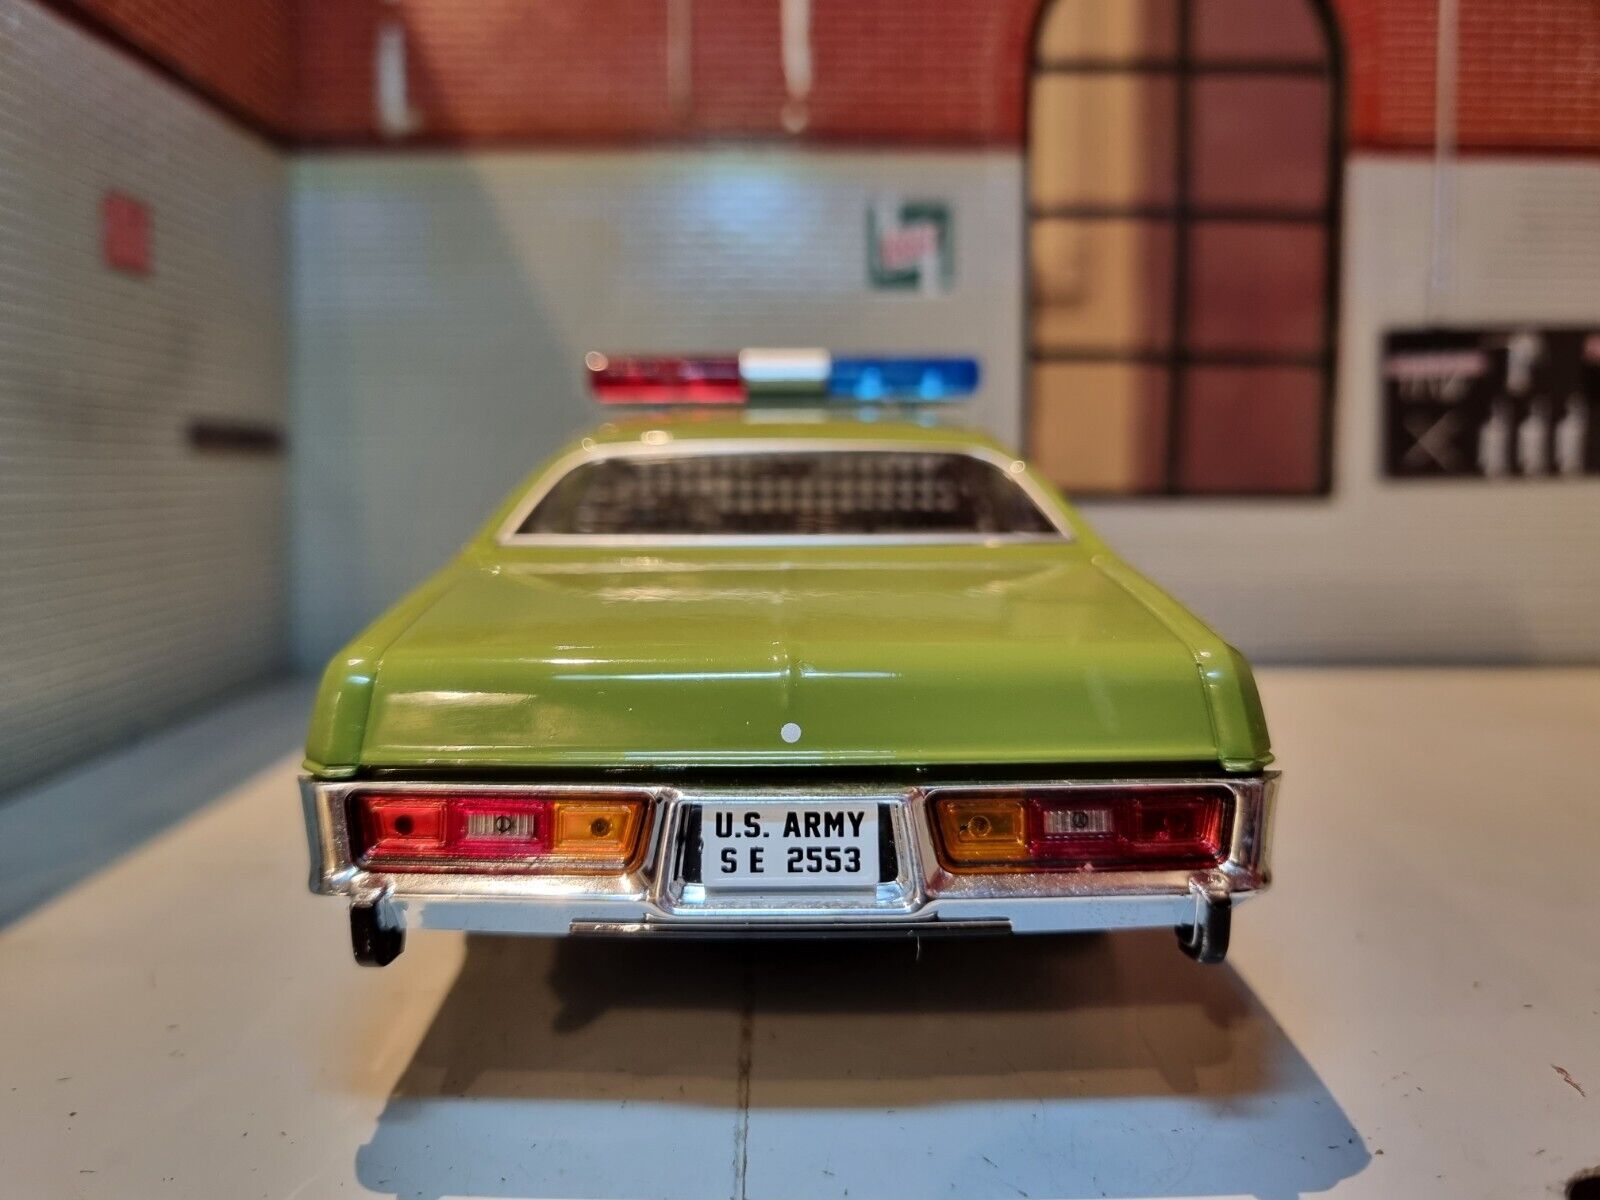 Rear View of A 1:24 Scale Green Plymouth Fury, Number plate Reads U.S. ARMY S E 2553